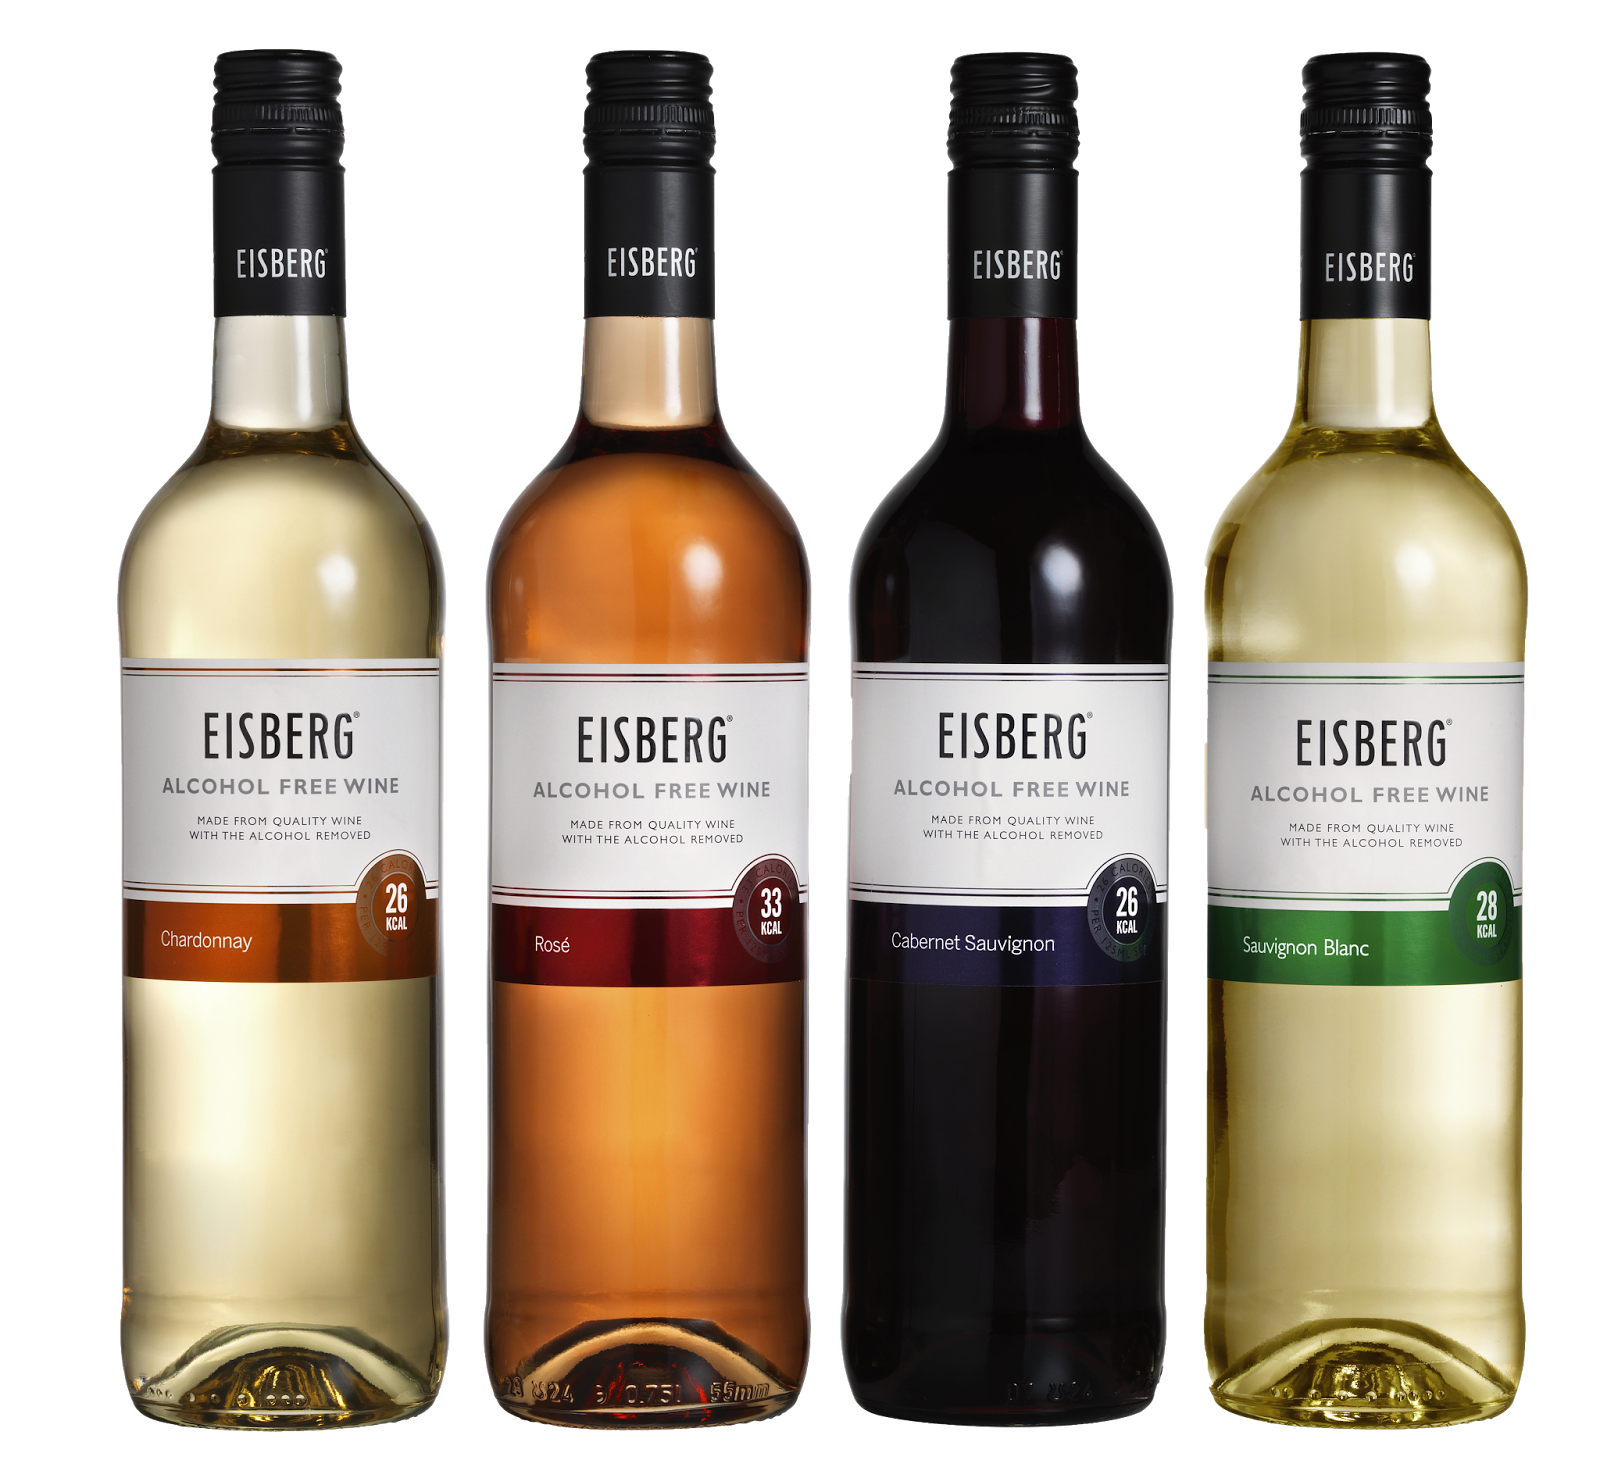 Alcohol Free Wine from Eisberg